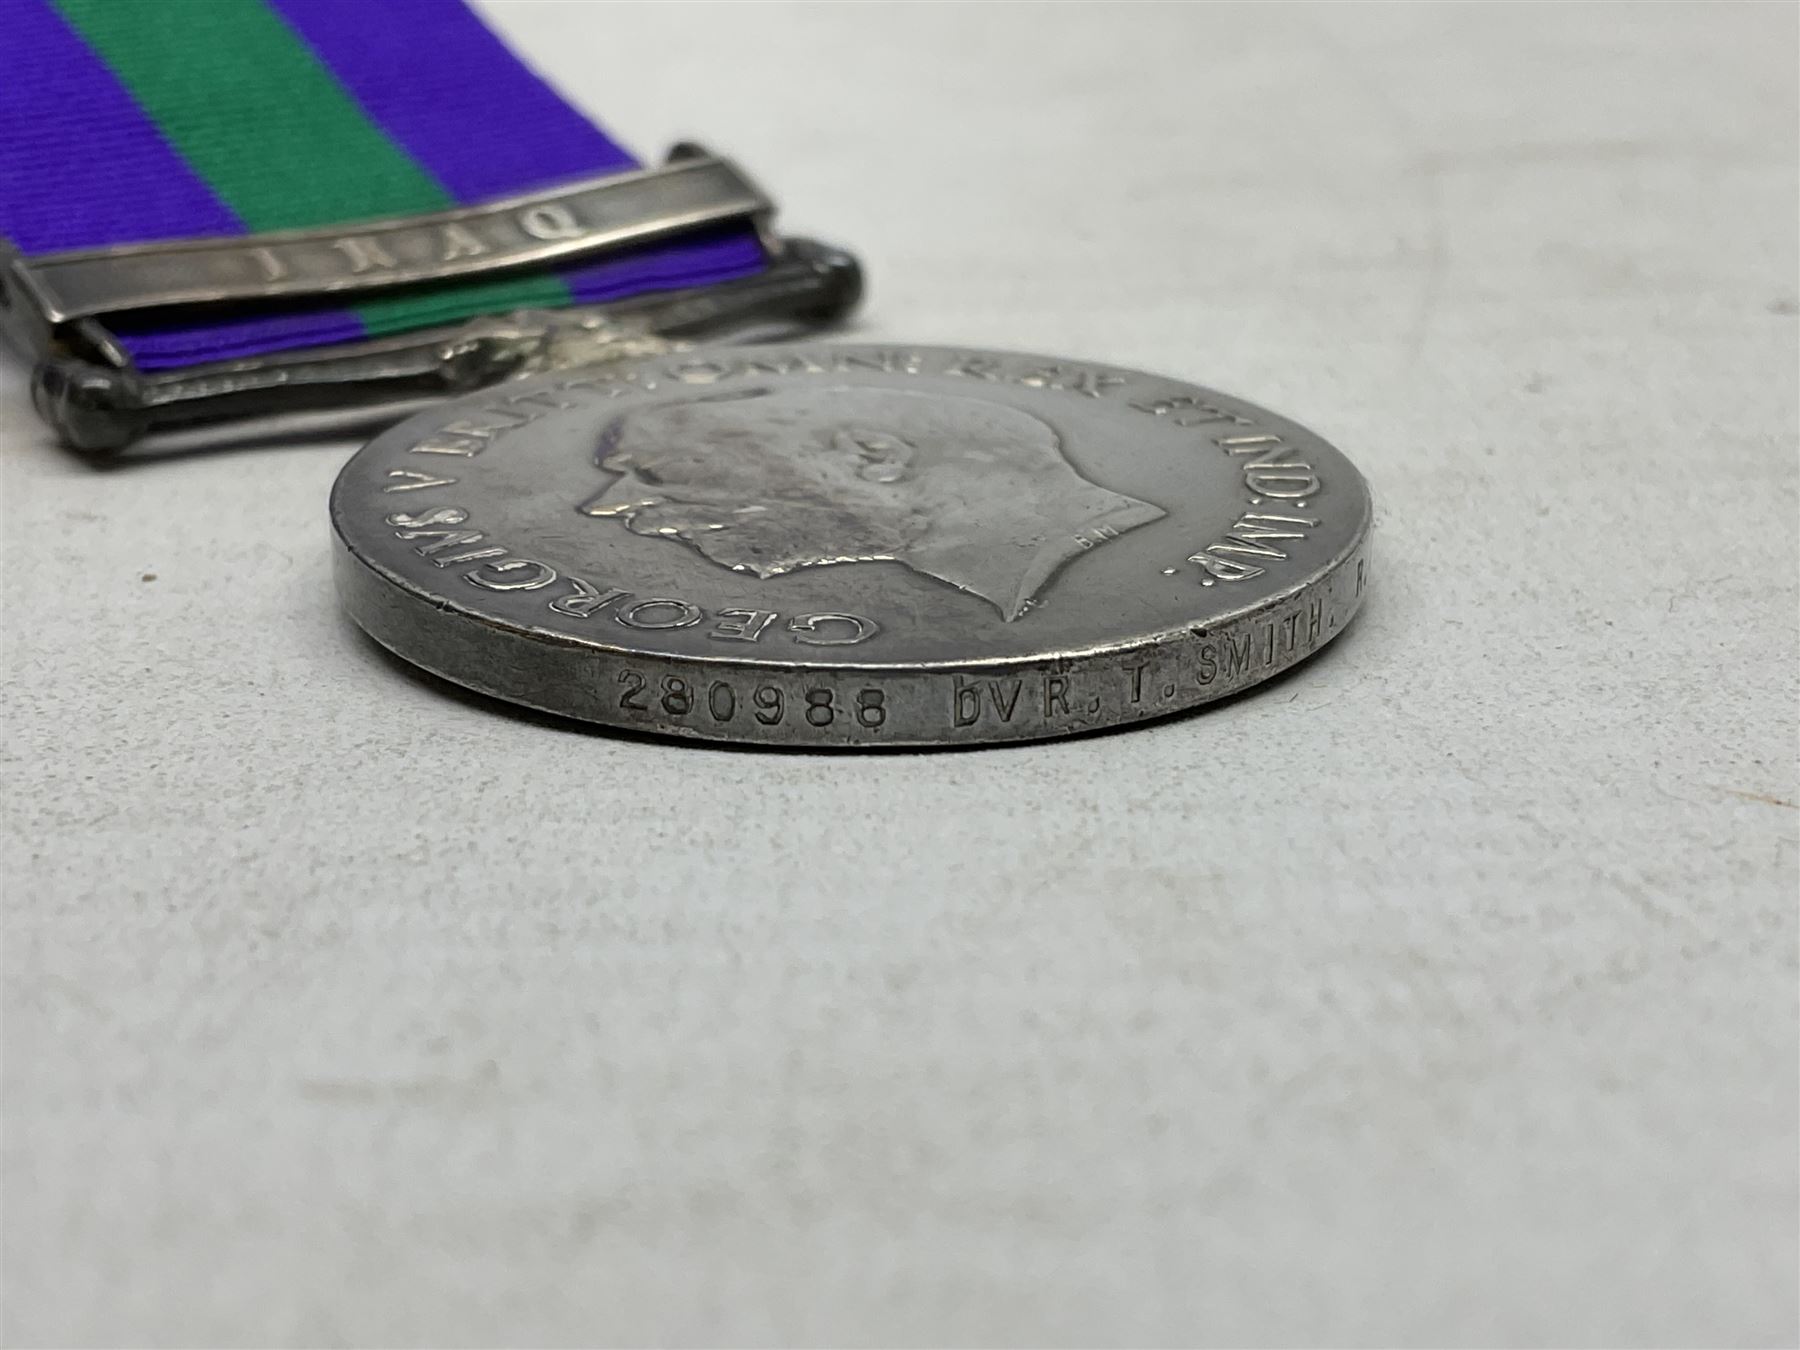 George V General Service Medal with Iraq clasp awarded to 280988 Dvr. T. Smith R.A.; with ribbon - Image 6 of 8